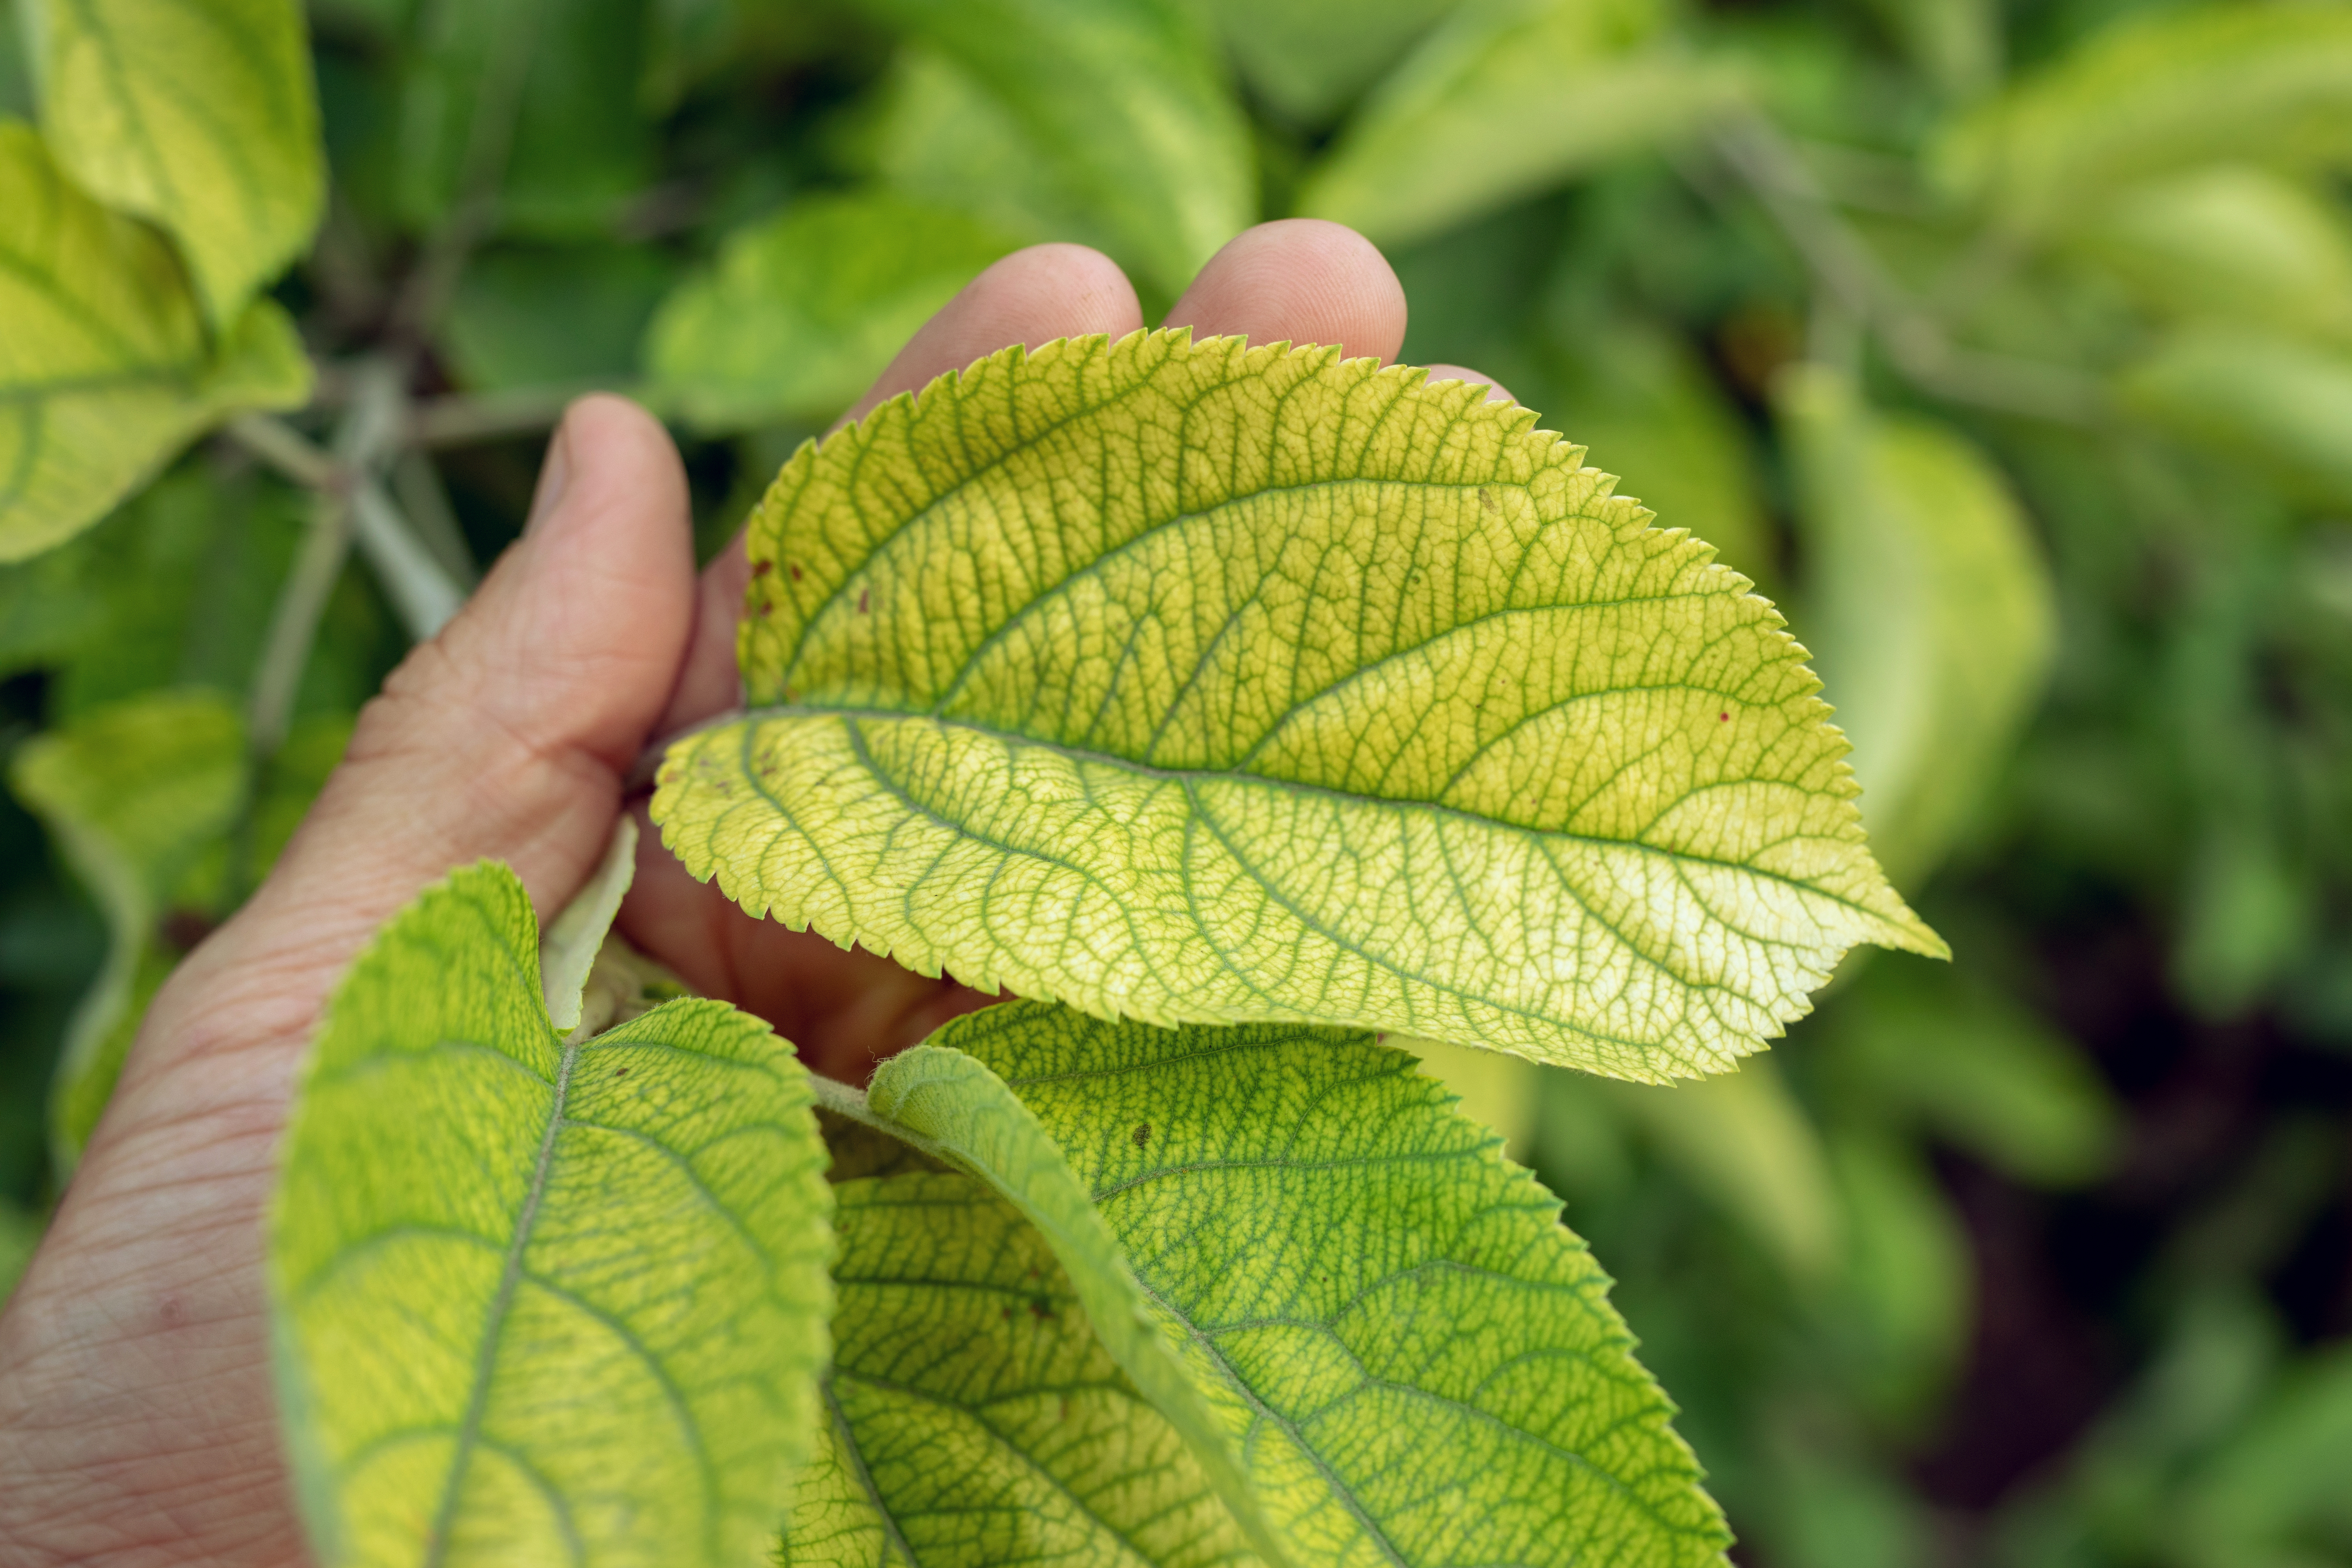 How to identify and treat nitrogen deficiency in plants